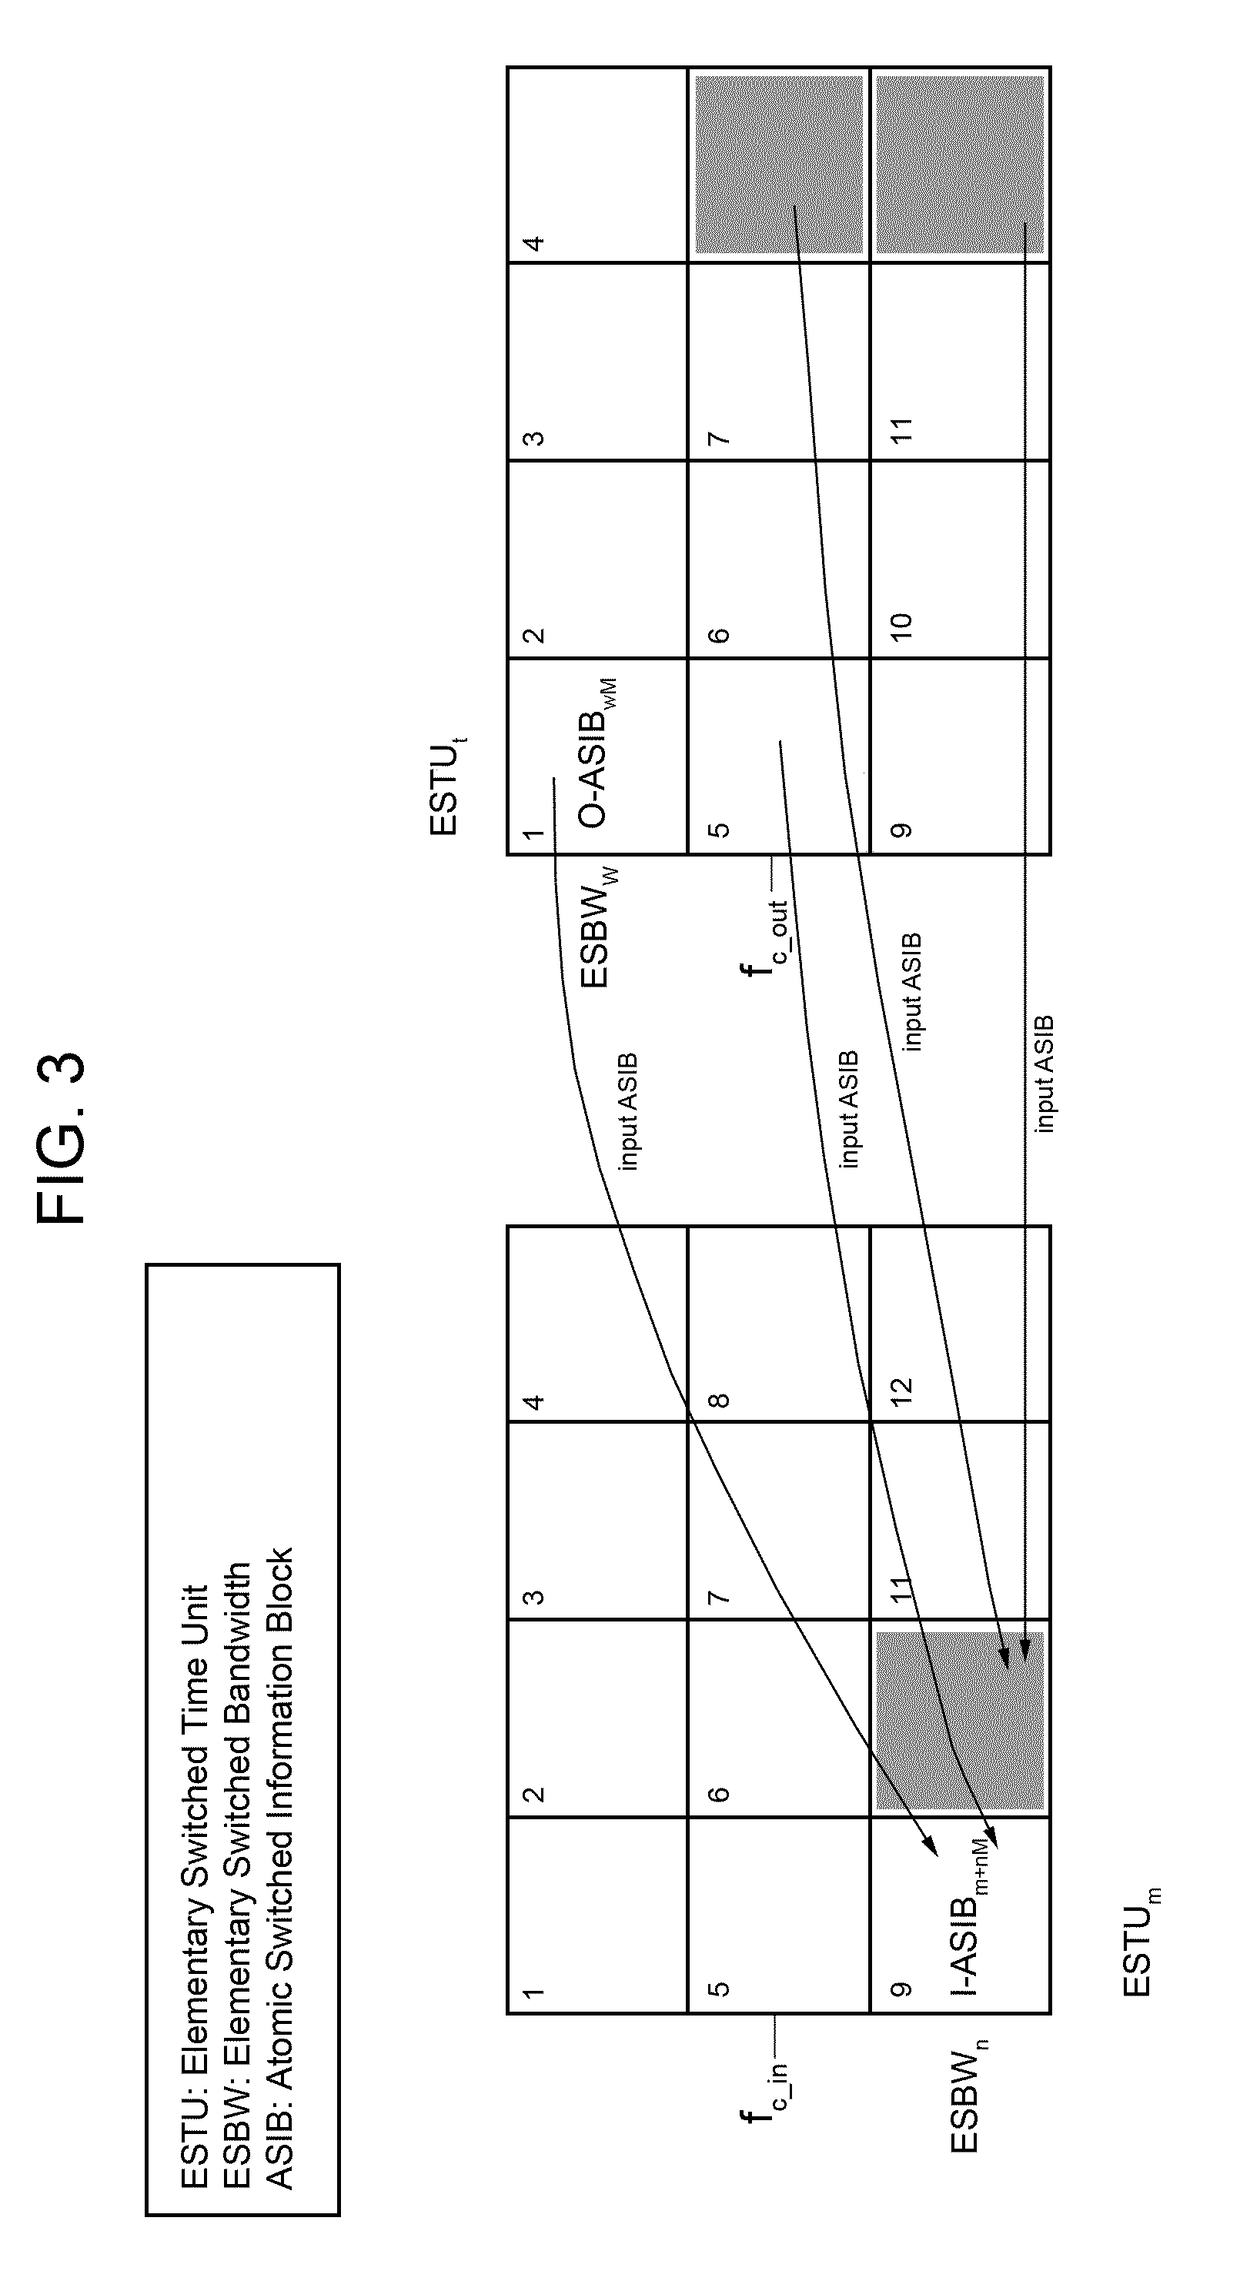 Hybrid Processor With Switching Control Based on Dynamic Bandwidth Allocation for Multi-Beam Satellite Systems